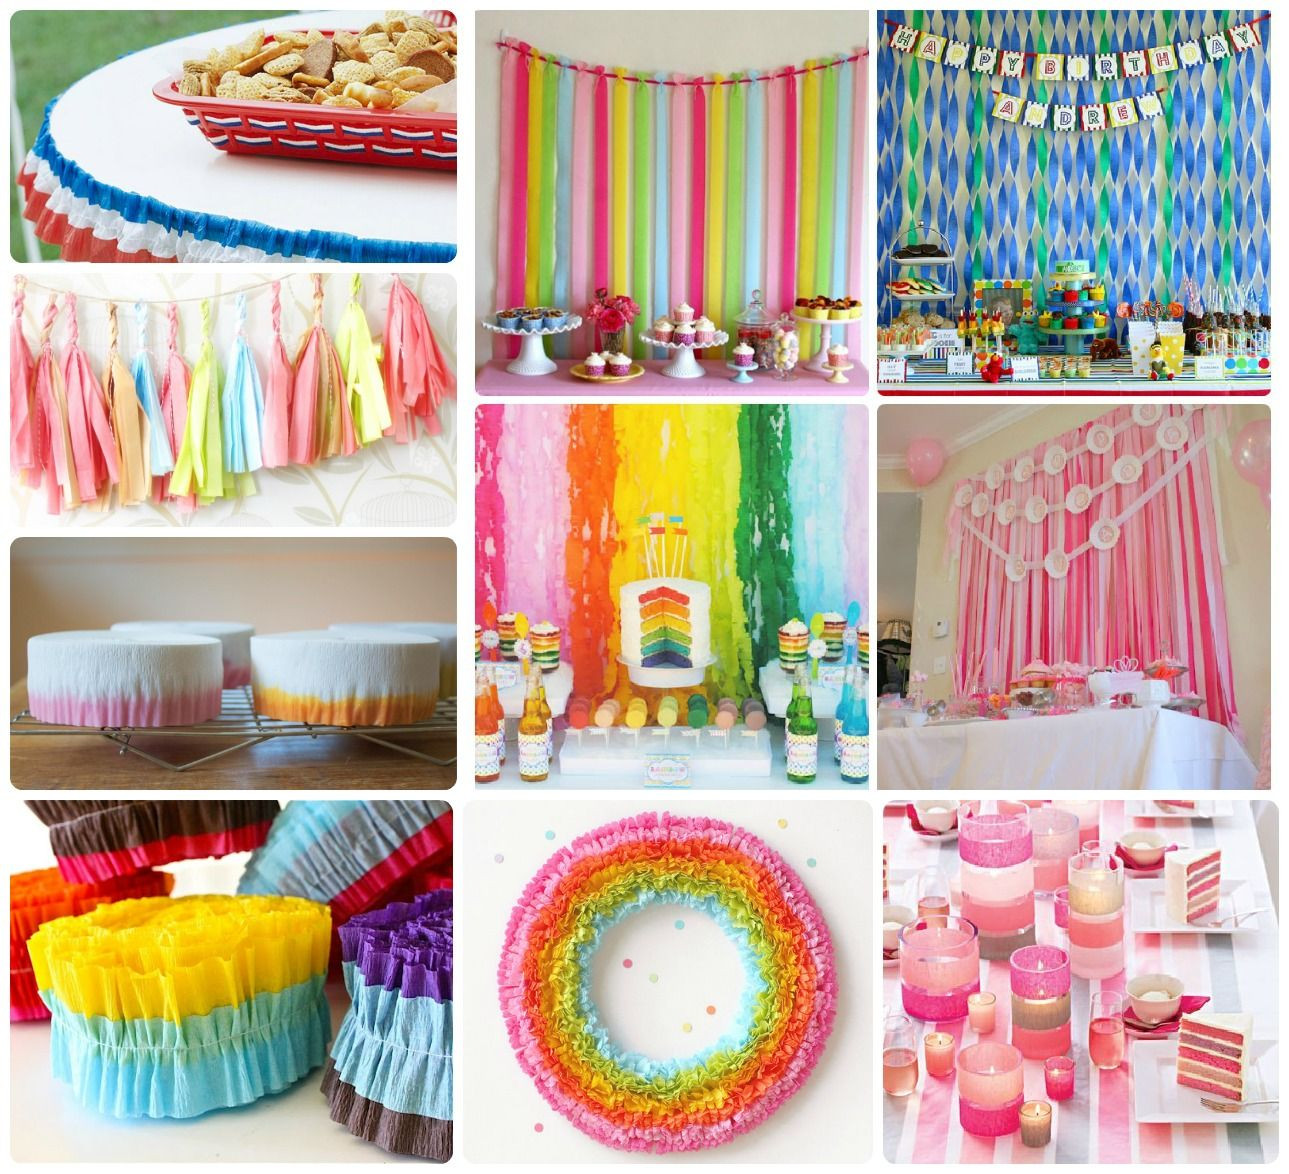 Streamer Decoration Ideas For Birthday Party
 Pretty streamer ideas for party decoration